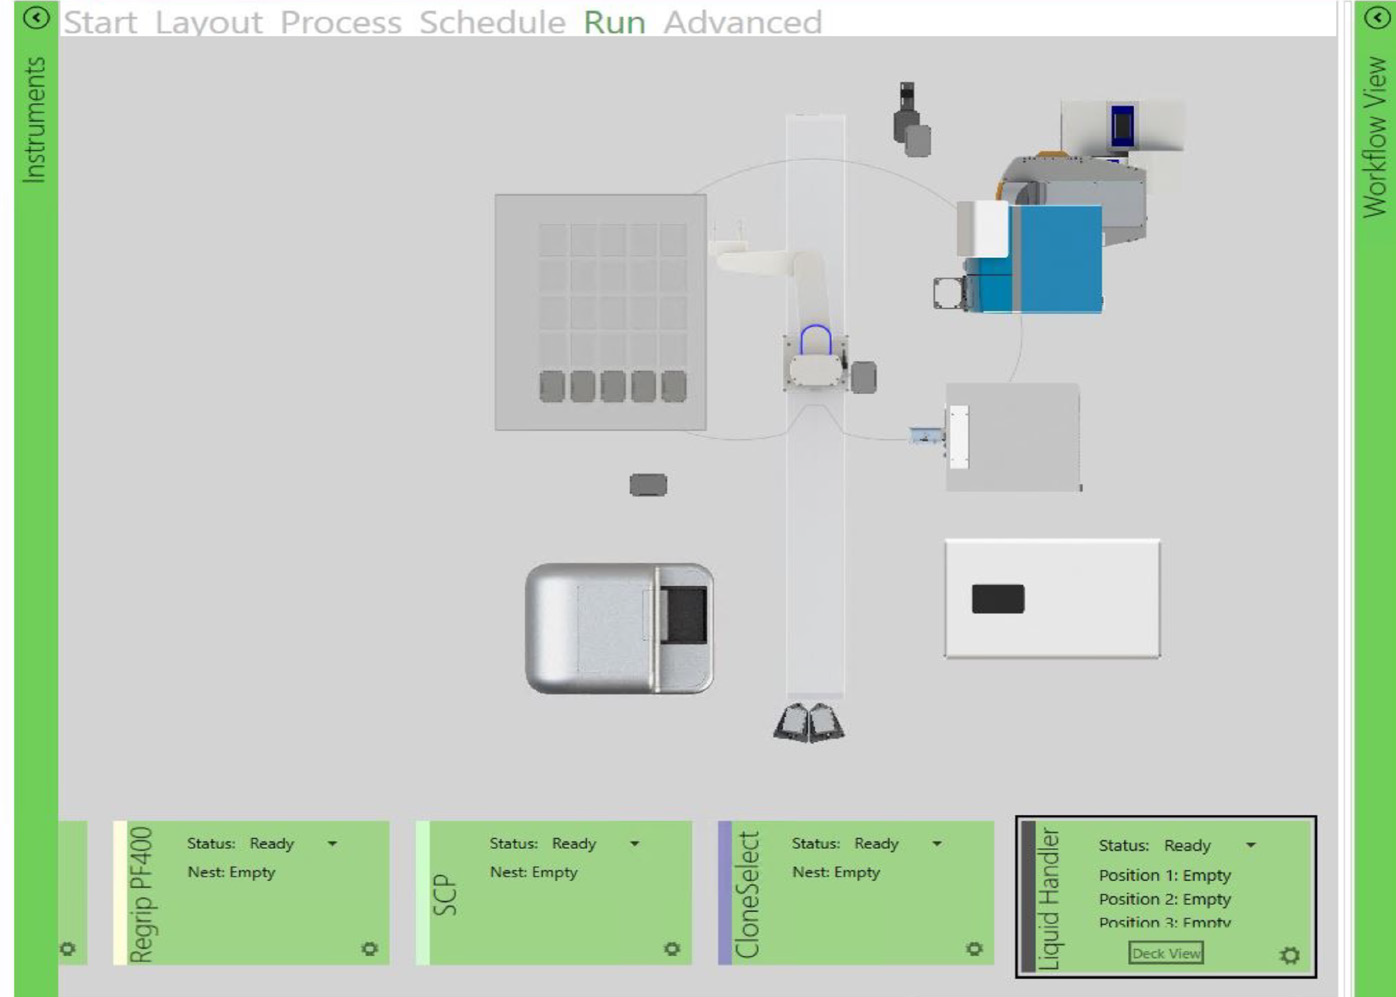 This virtual platform shows CSI-FL, automated incubator, liquid handler, hotel, and barcode readers. Integration of these instruments is done on a fully virtual environment (GBG) across a workstation to run an automated workflow. The devices were monitored in real-time and added or dropped off of the system based on the workflow needs.